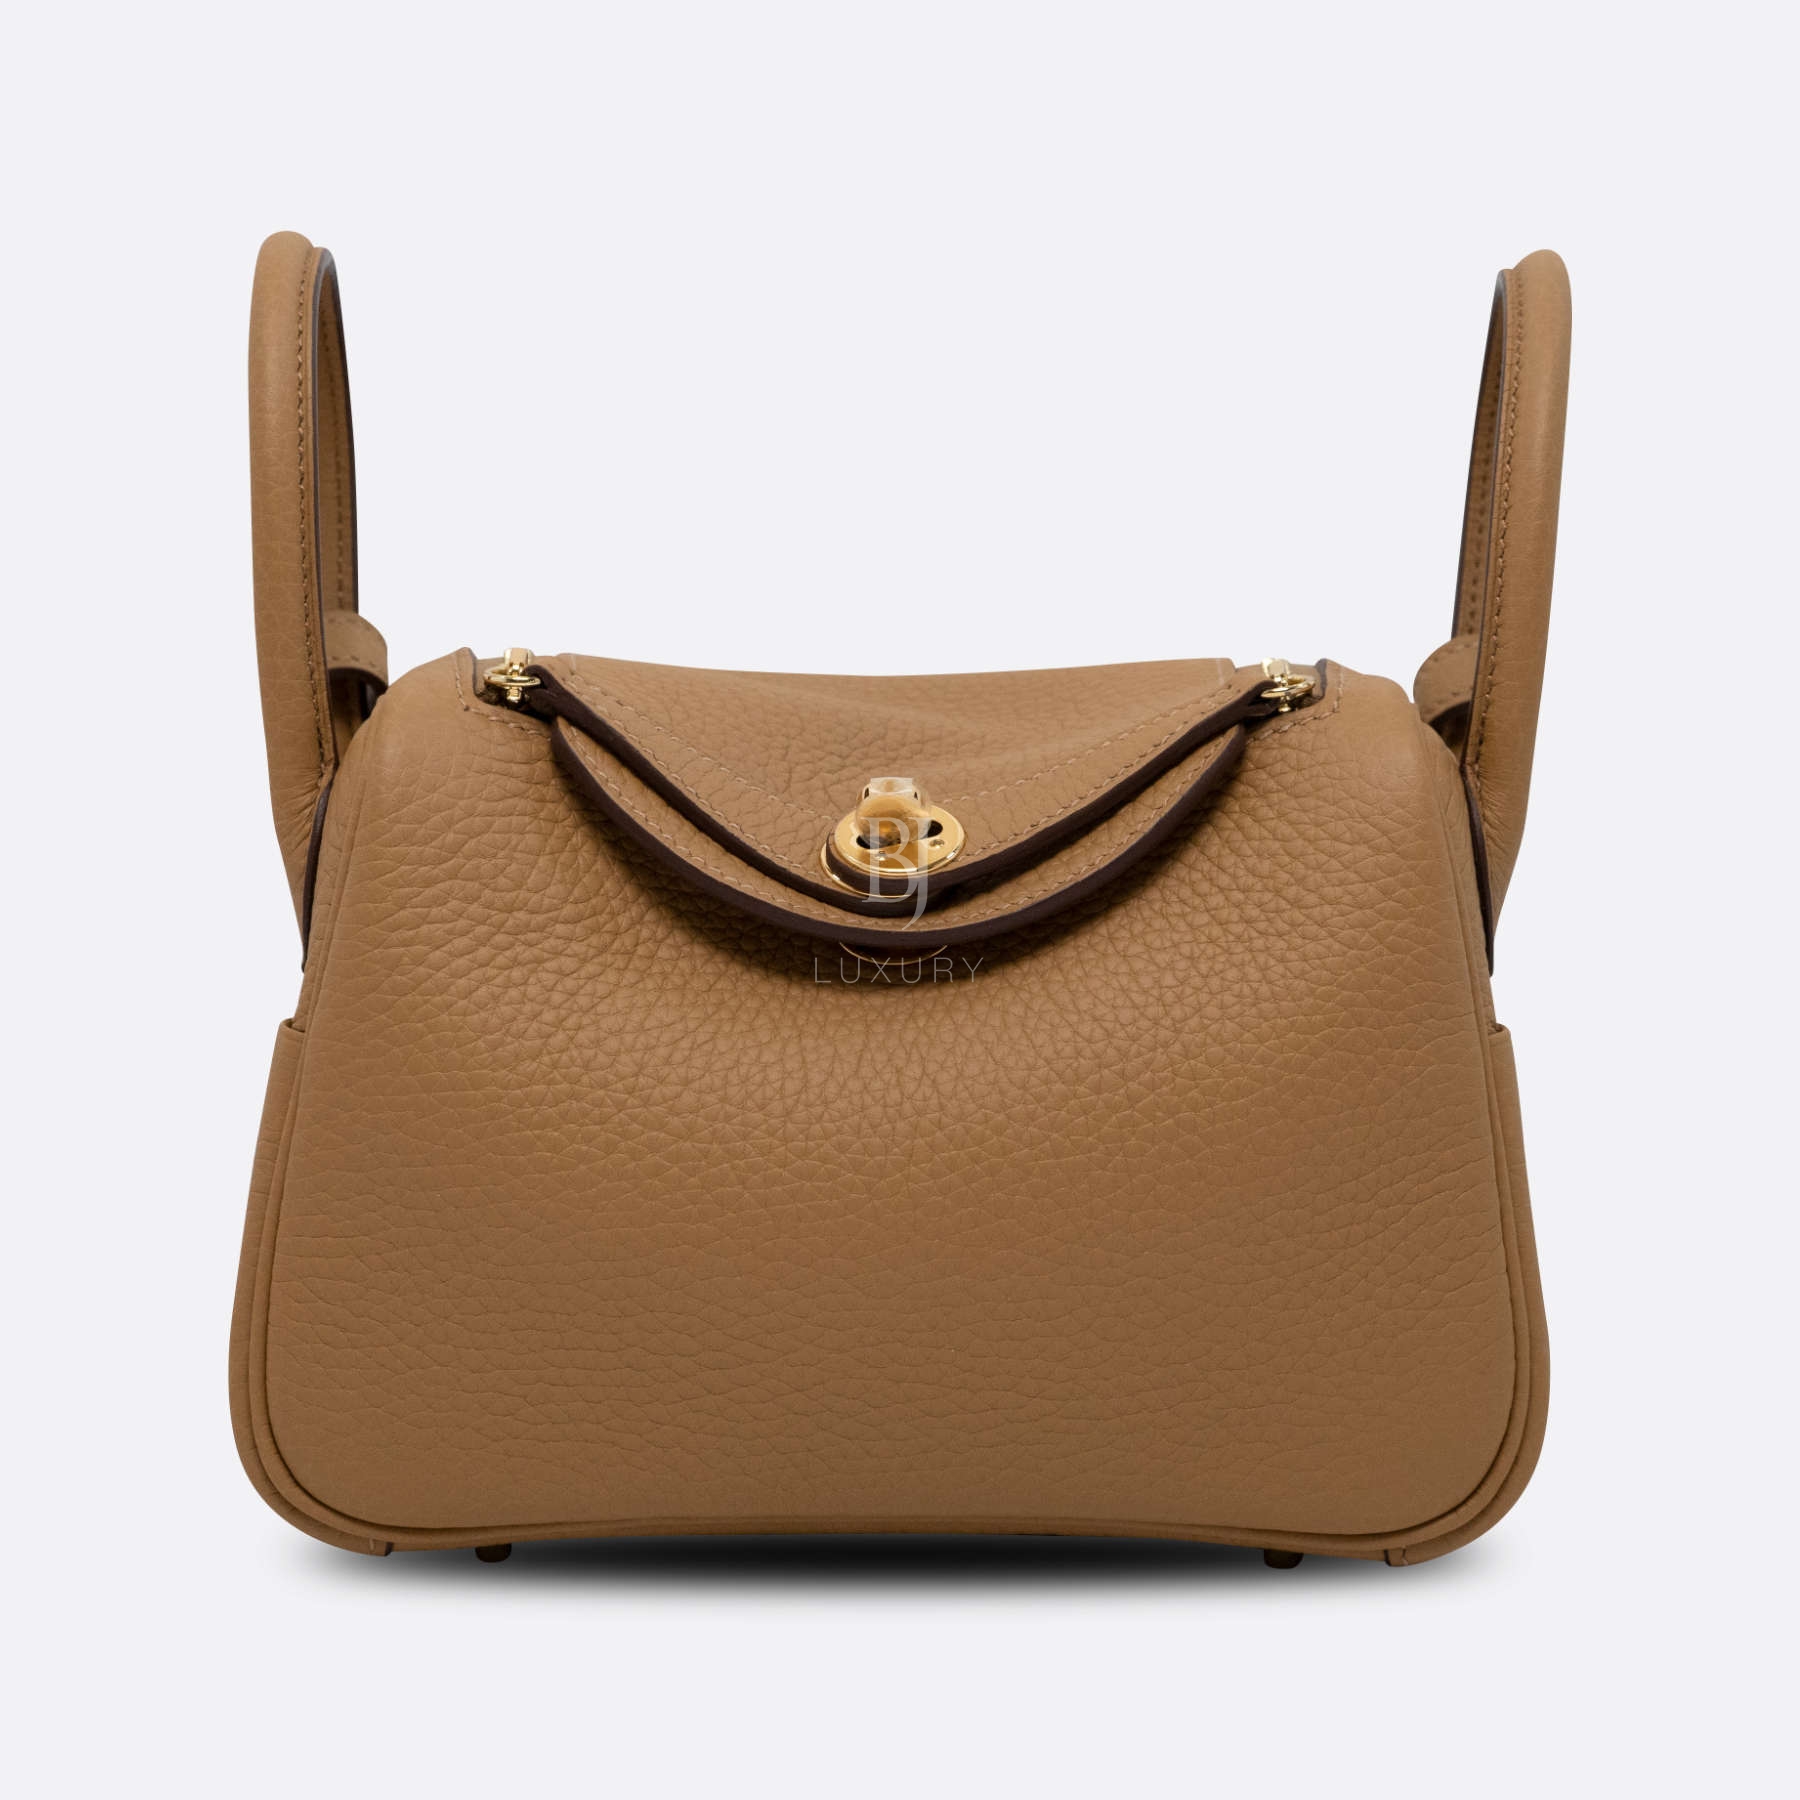 HERMES-LINDY-MINI-BISCUIT-CLEMENCE-4525 front.jpg